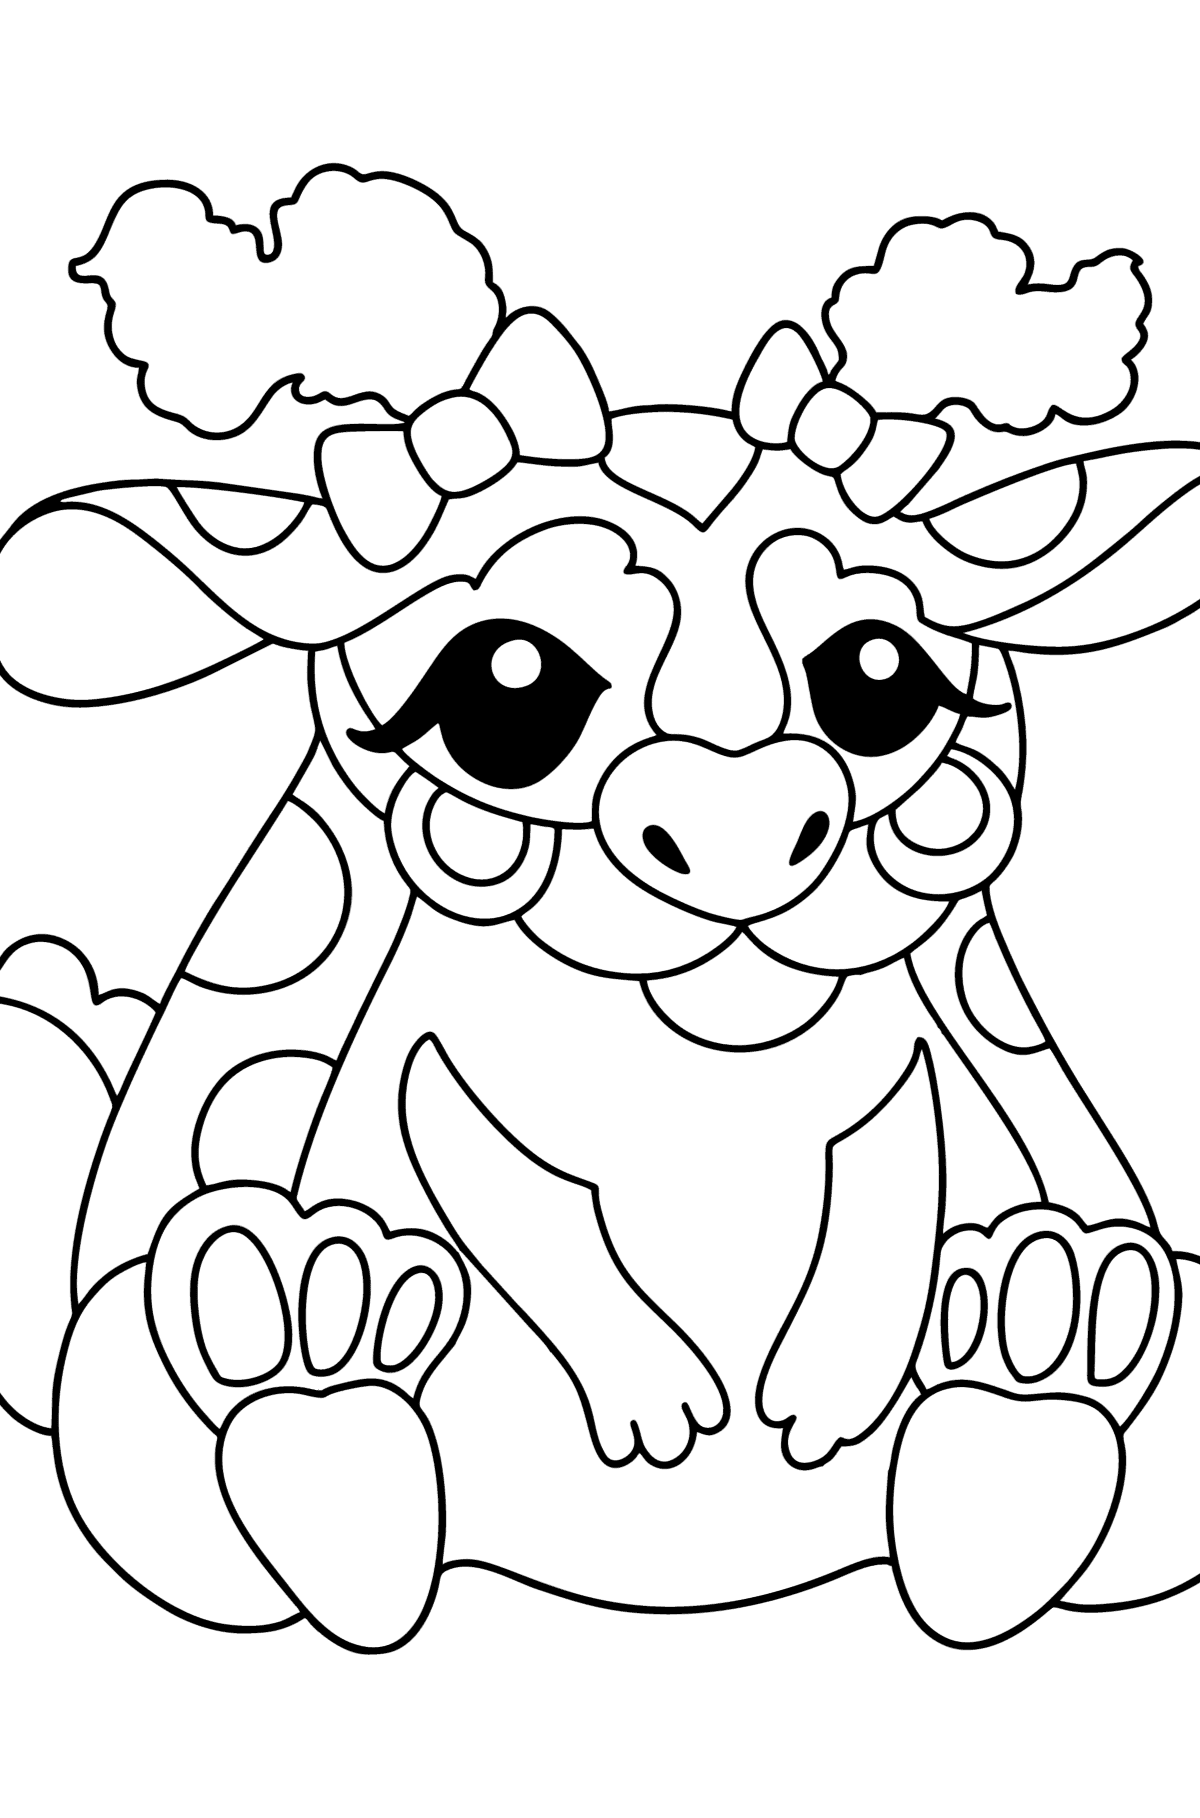 Dragon girl coloring page - Coloring Pages for Kids